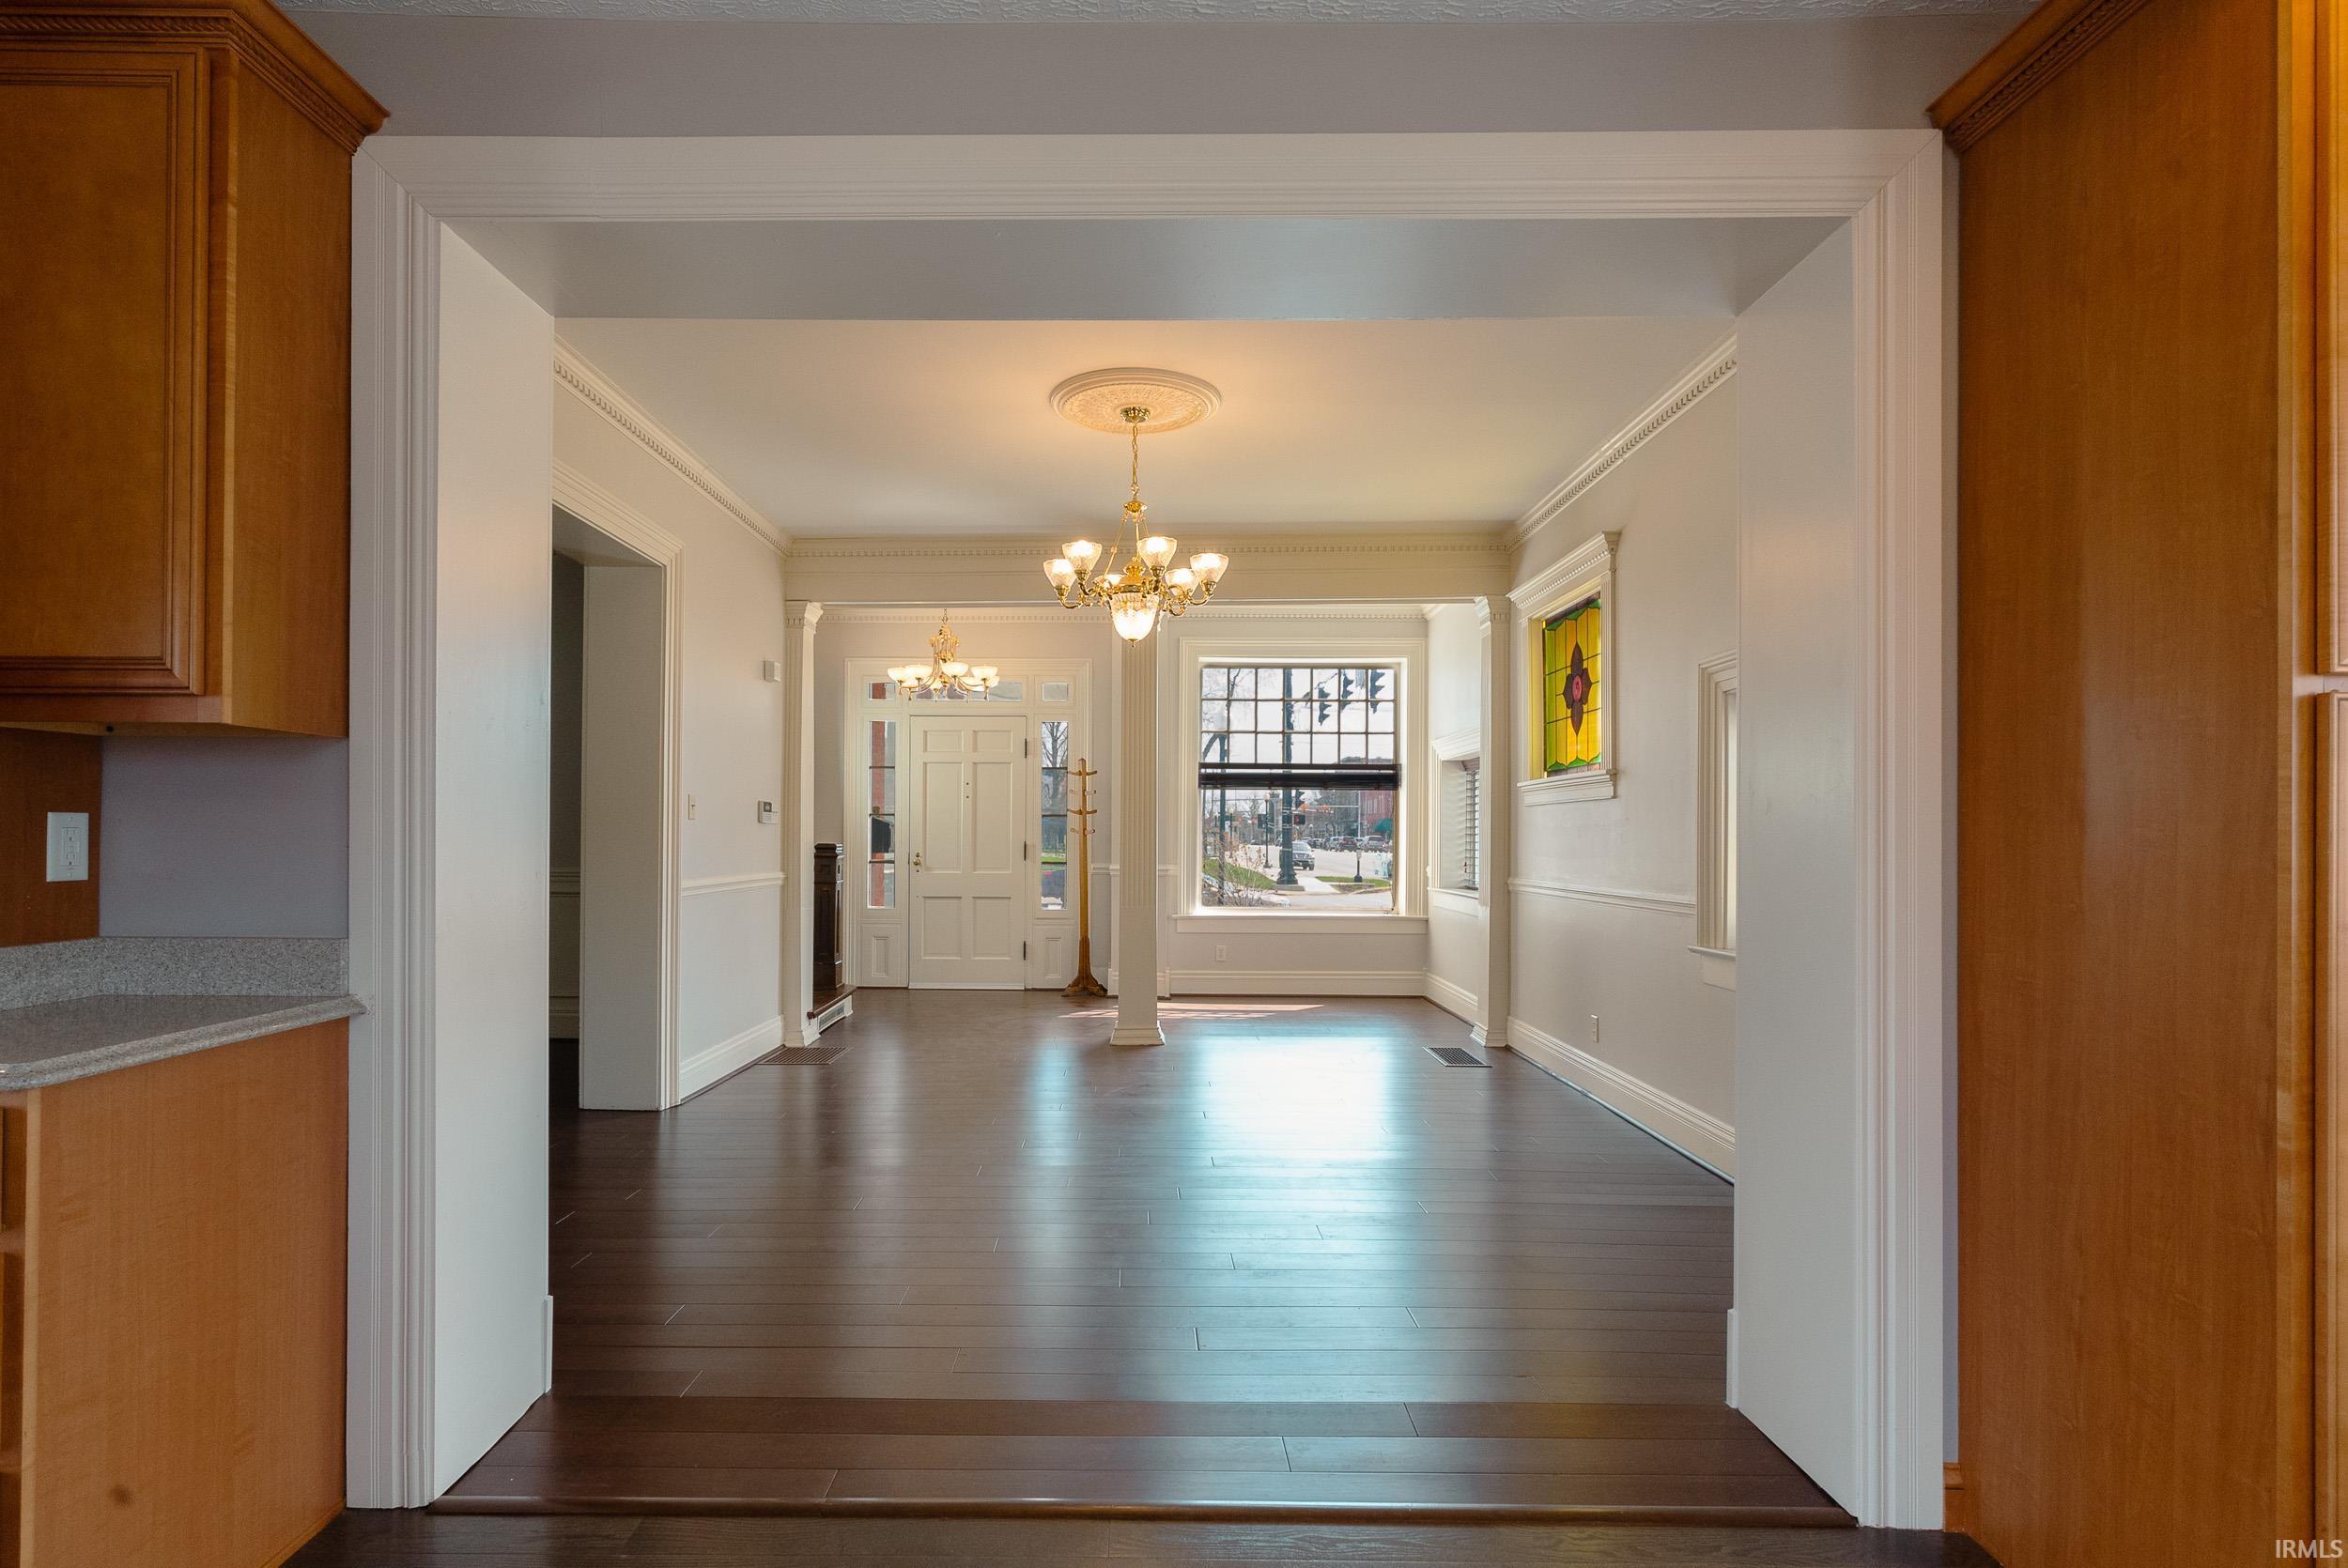 The tasteful upgrades include: strand bamboo flooring on the first and second floor and custom built storm windows.